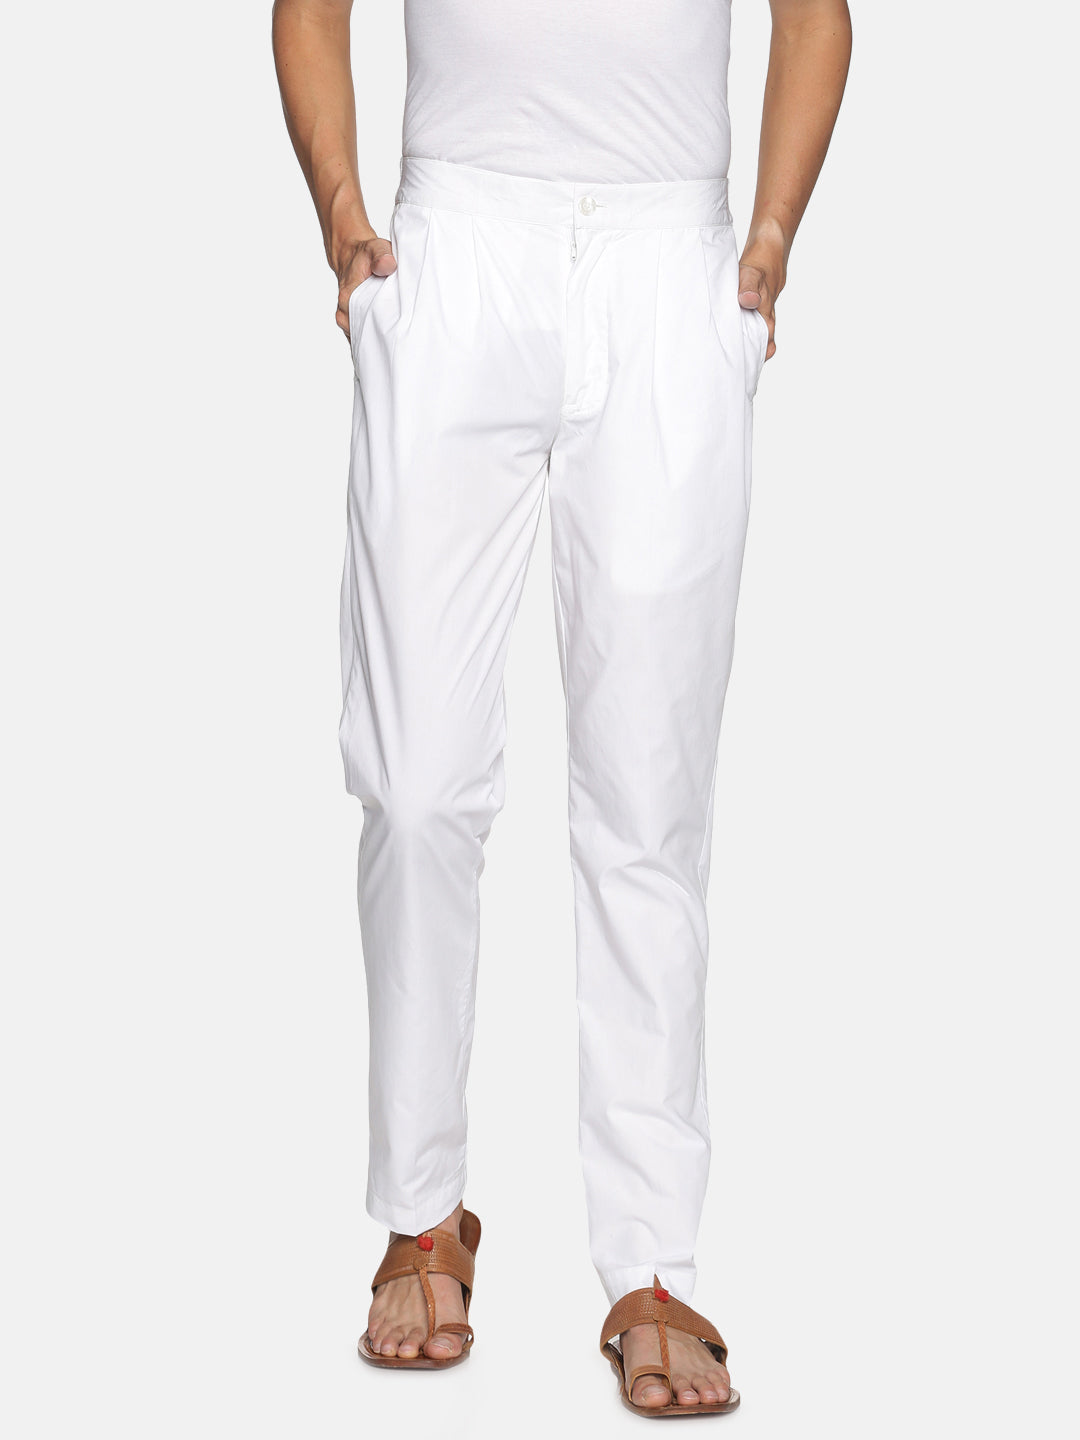 White Cotton Regular Fit Trouser with Pleated Front